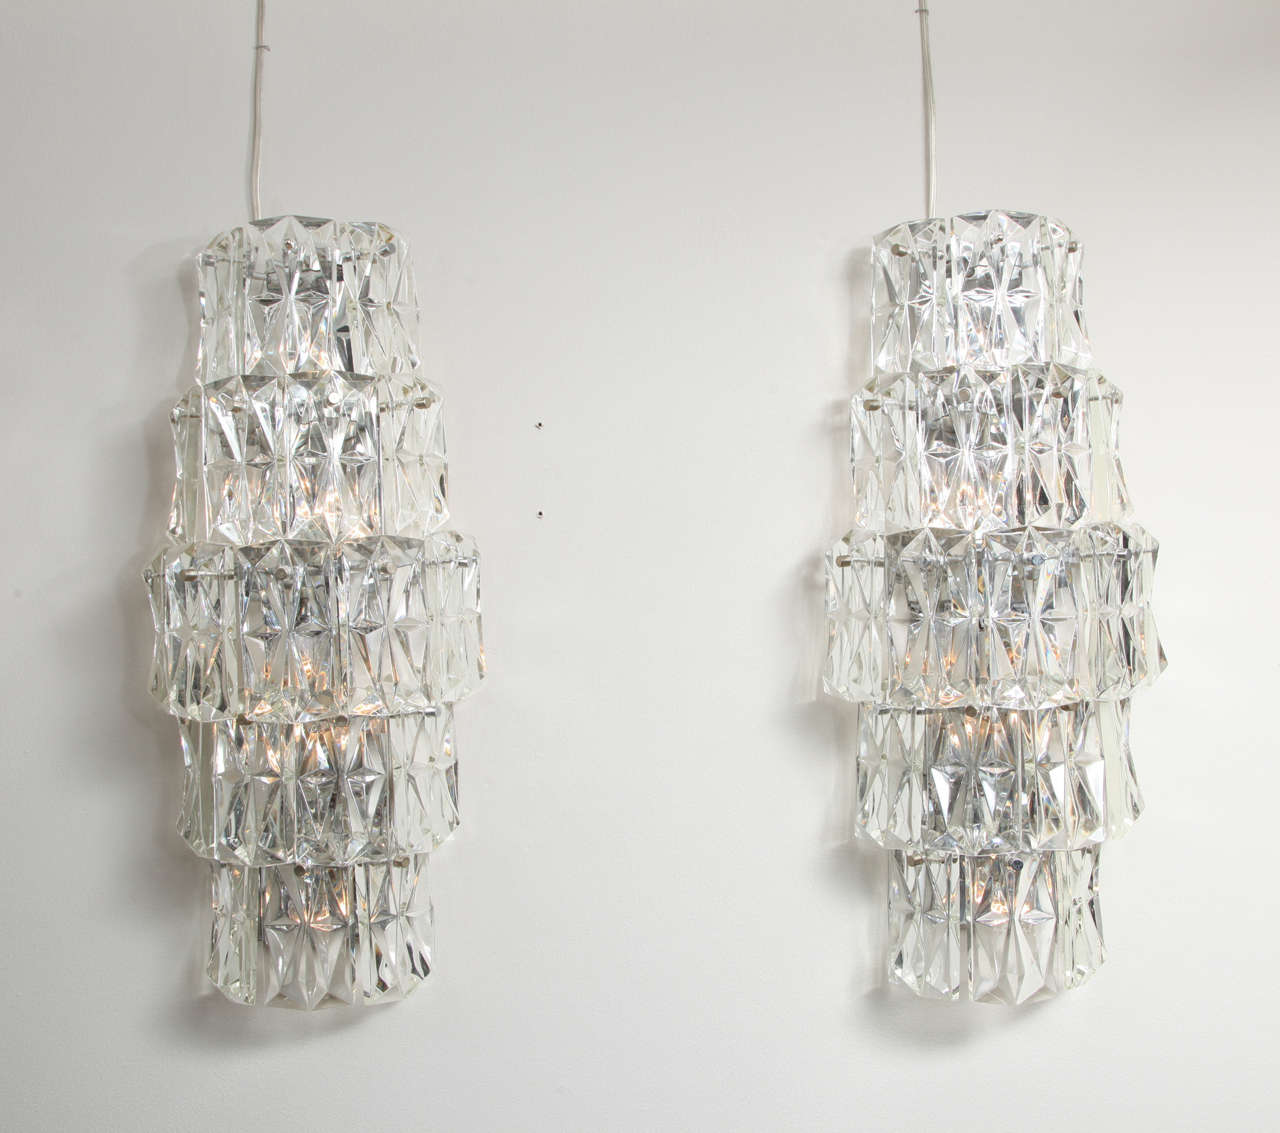 A pair of contemporary design oversized crystal sconces with five tiers of large rectangular faceted drops concealing electric light sockets.